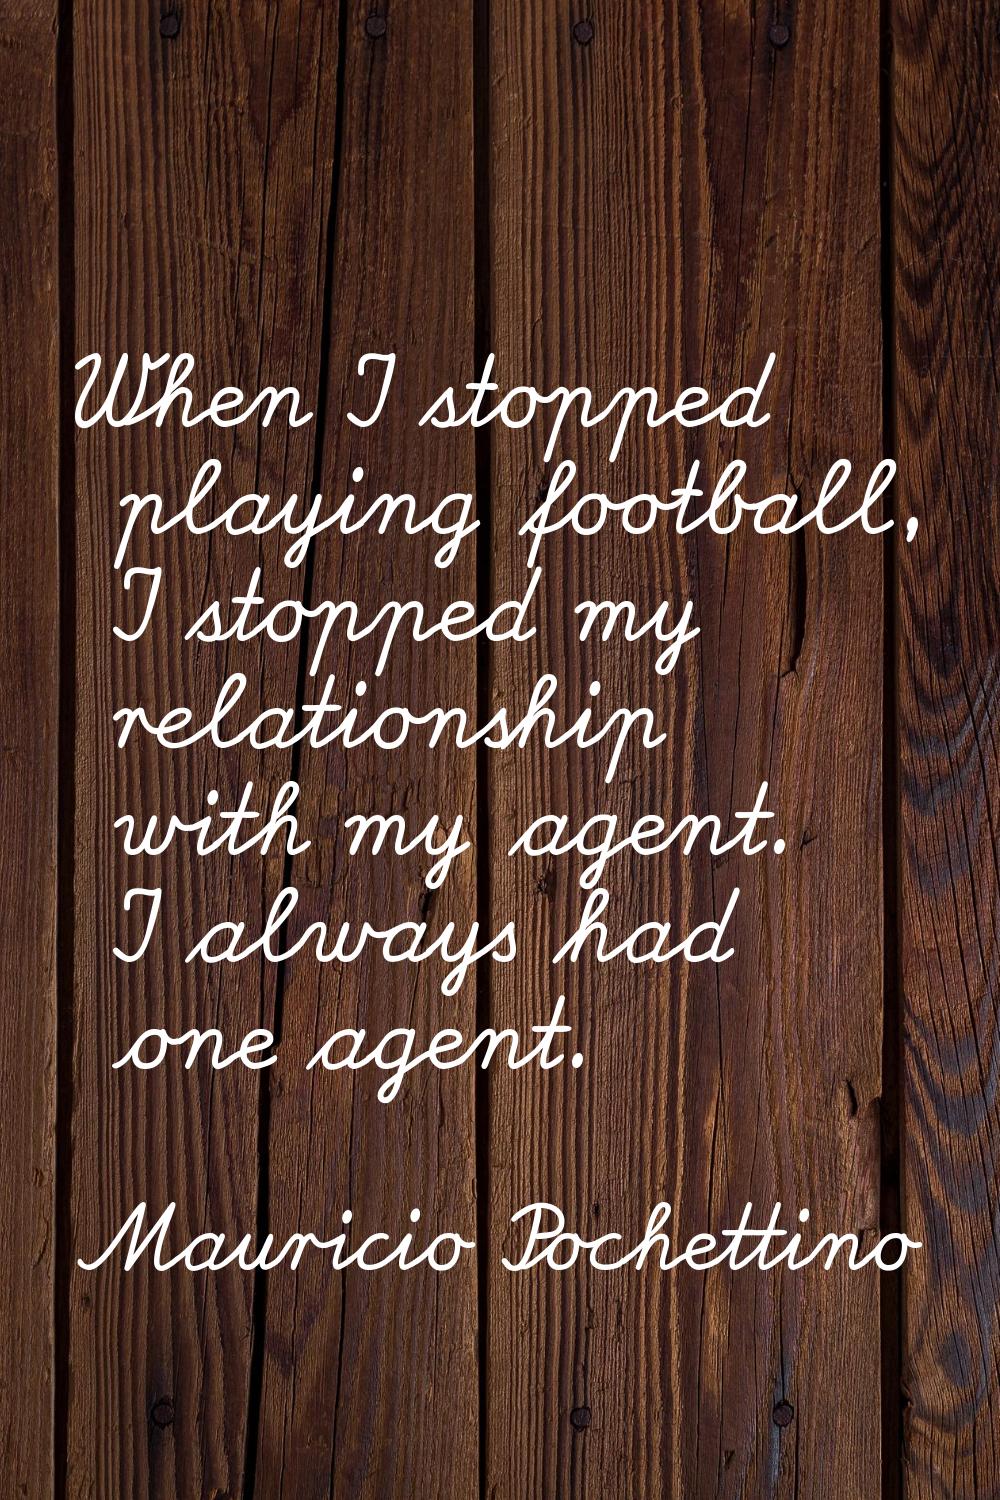 When I stopped playing football, I stopped my relationship with my agent. I always had one agent.